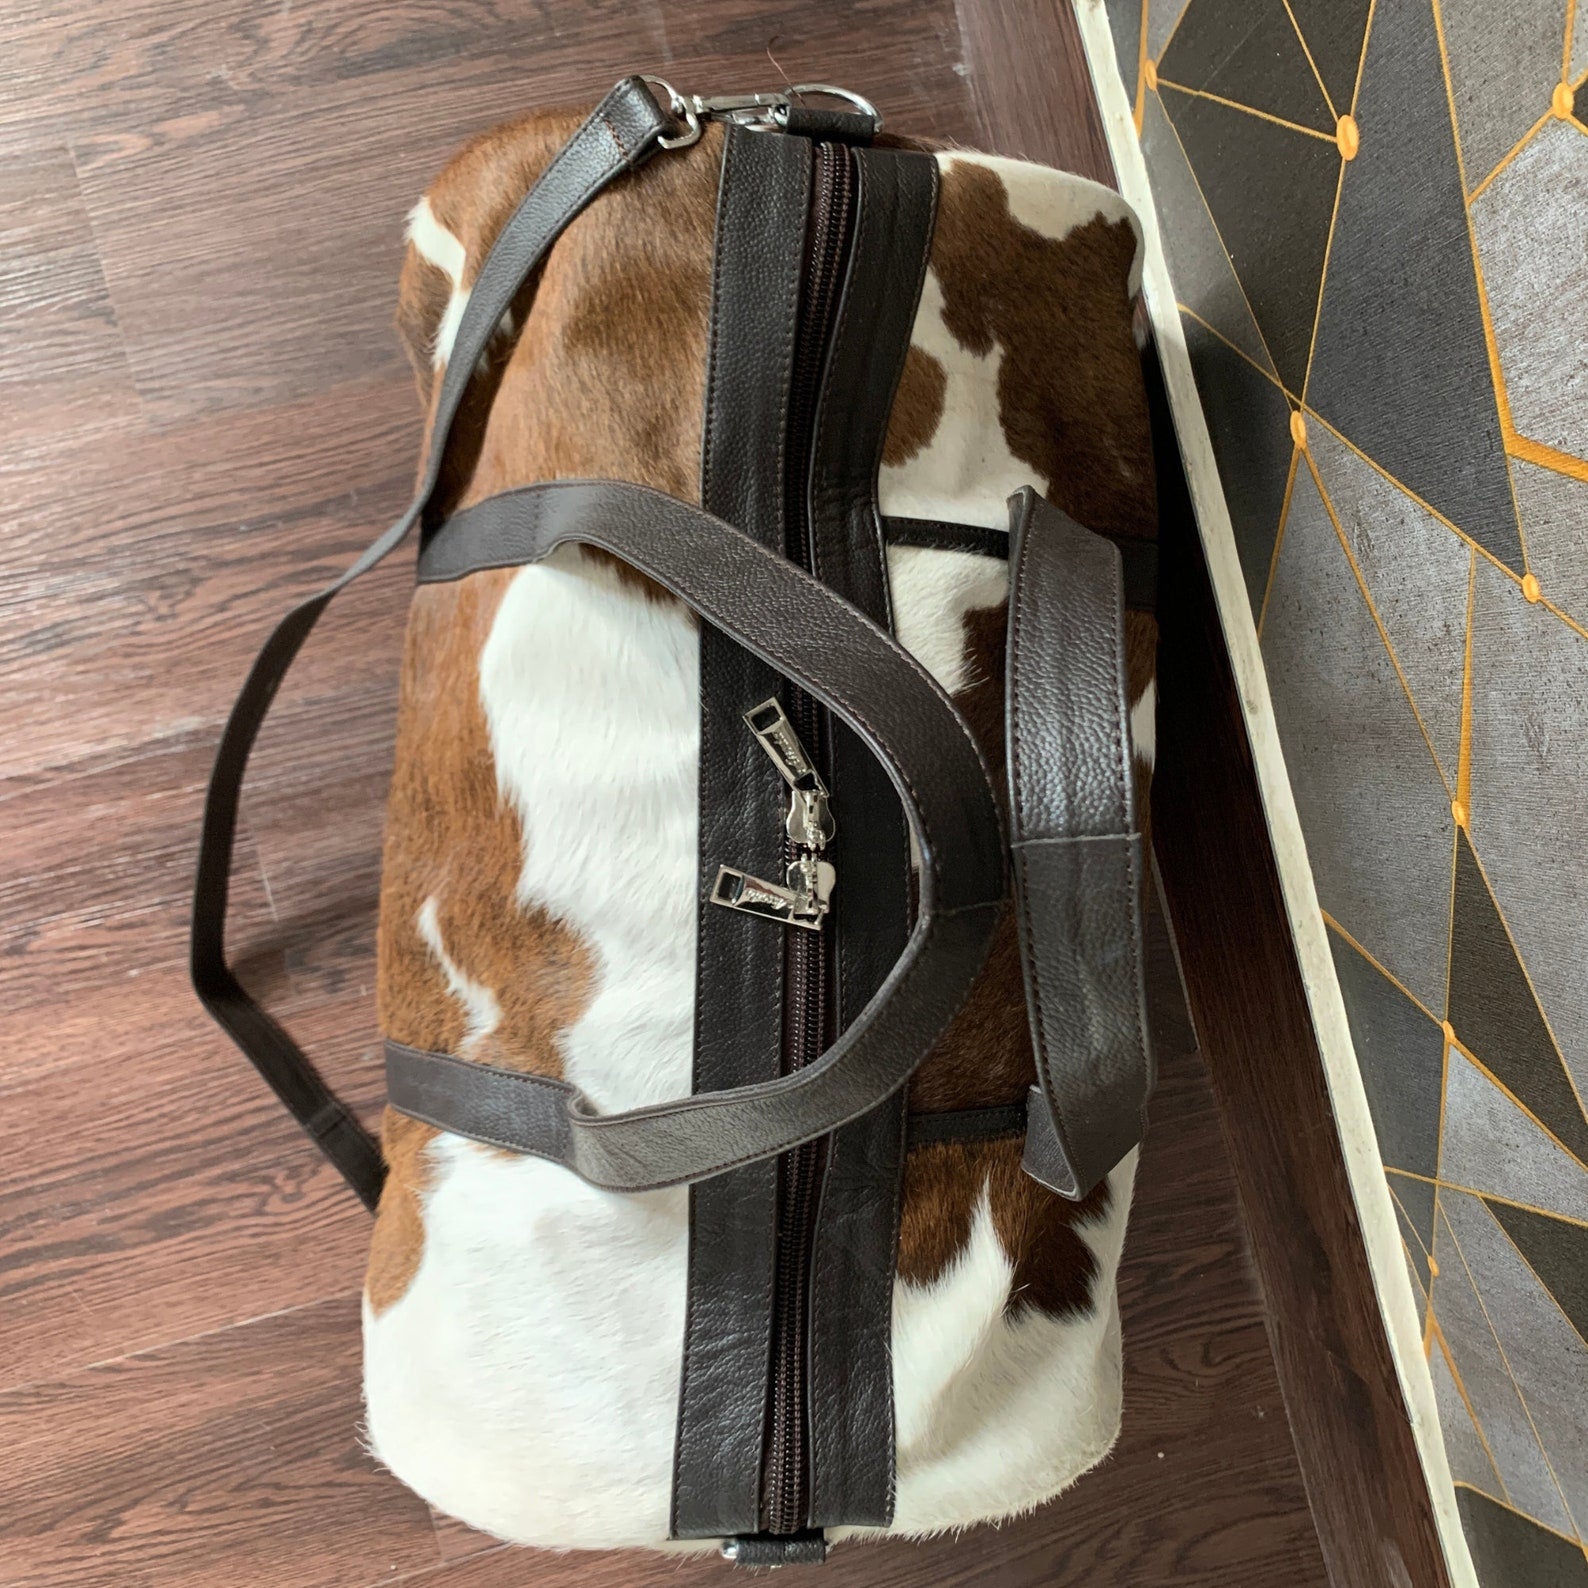 Reliable cowhide duffle bag for all your travel needs. Built to last.